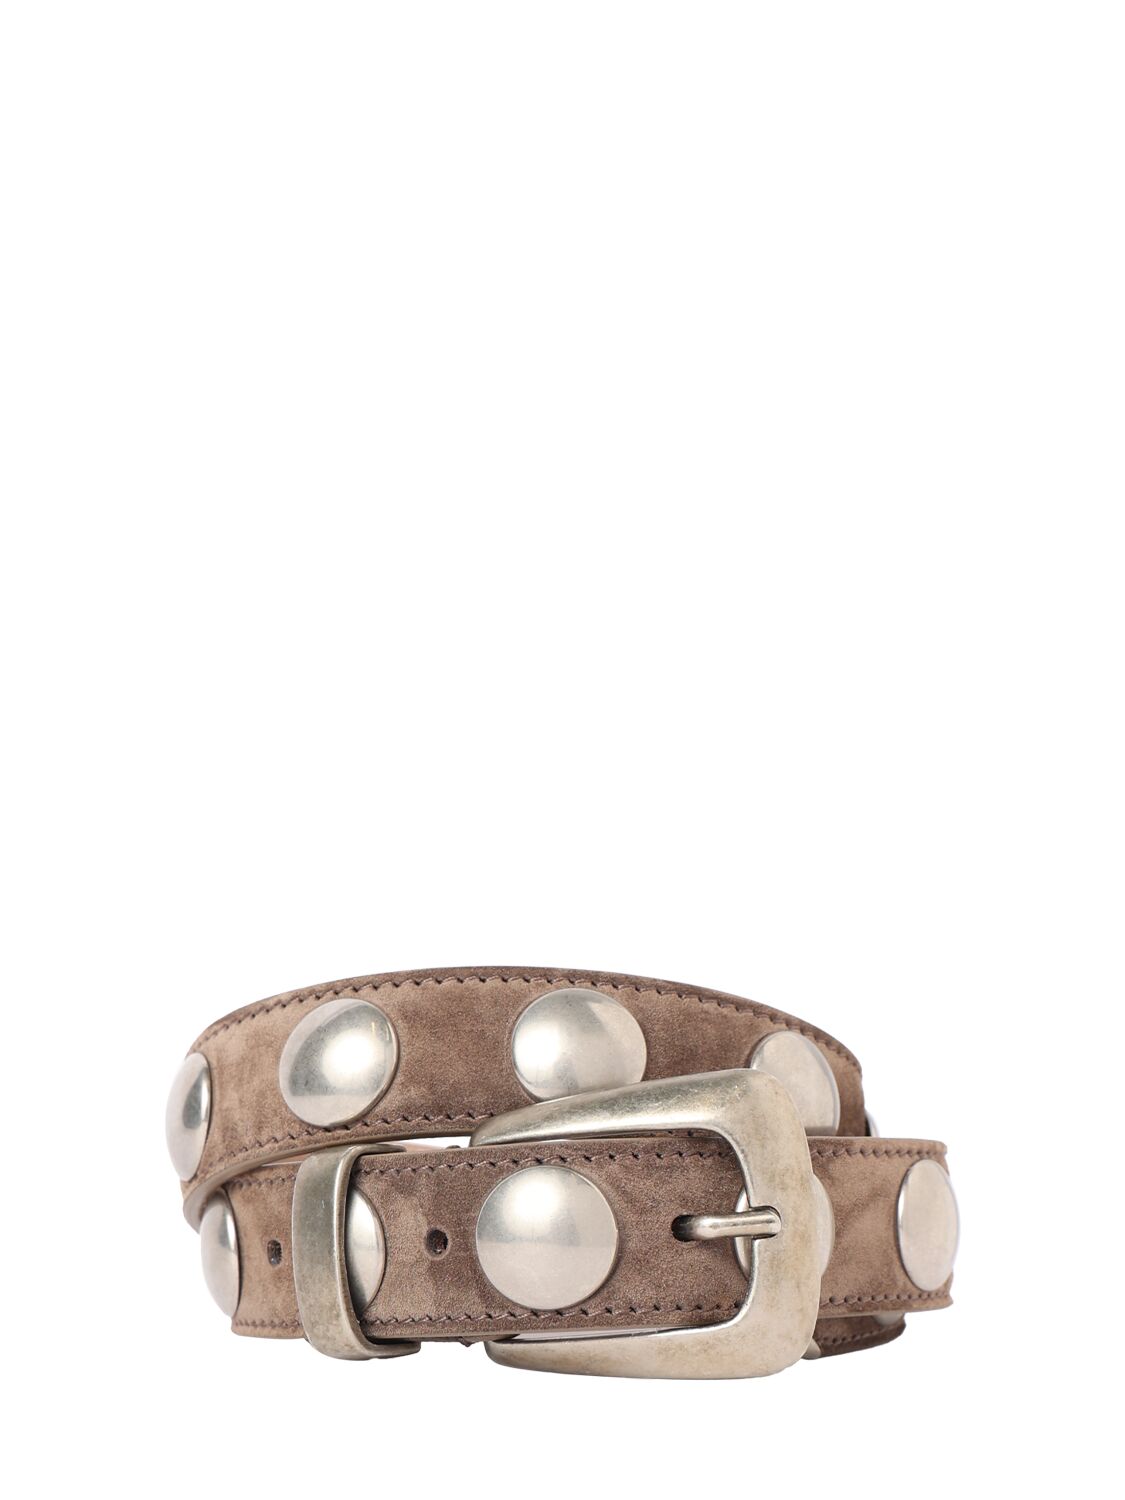 Khaite Benny Studded Suede Belt In Toffee